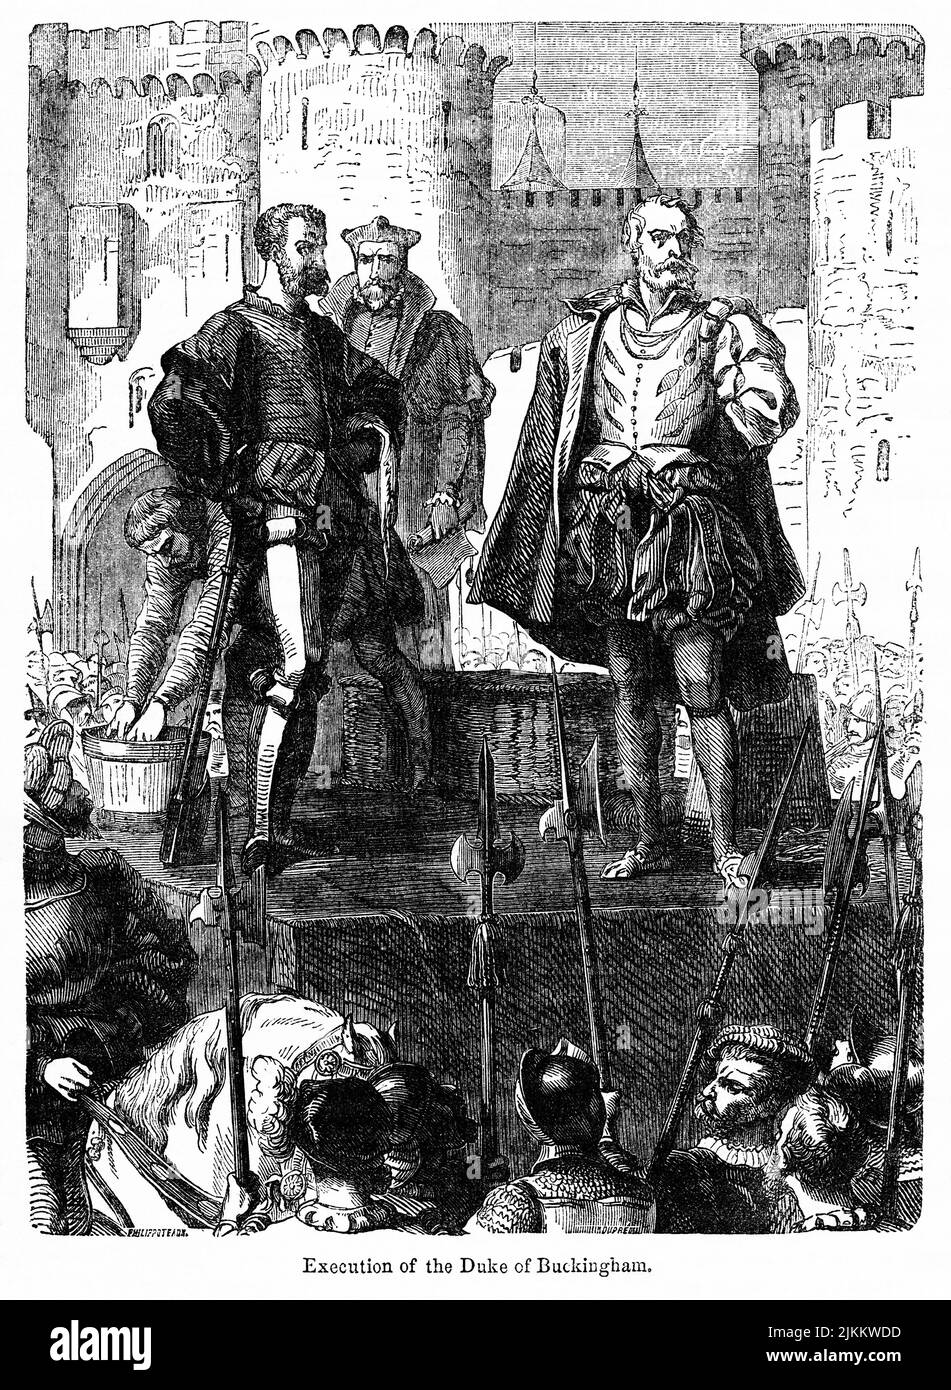 Execution of the Duke of Buckingham, Illustration from the Book, 'John Cassel’s Illustrated History of England, Volume II', text by William Howitt, Cassell, Petter, and Galpin, London, 1858 Stock Photo